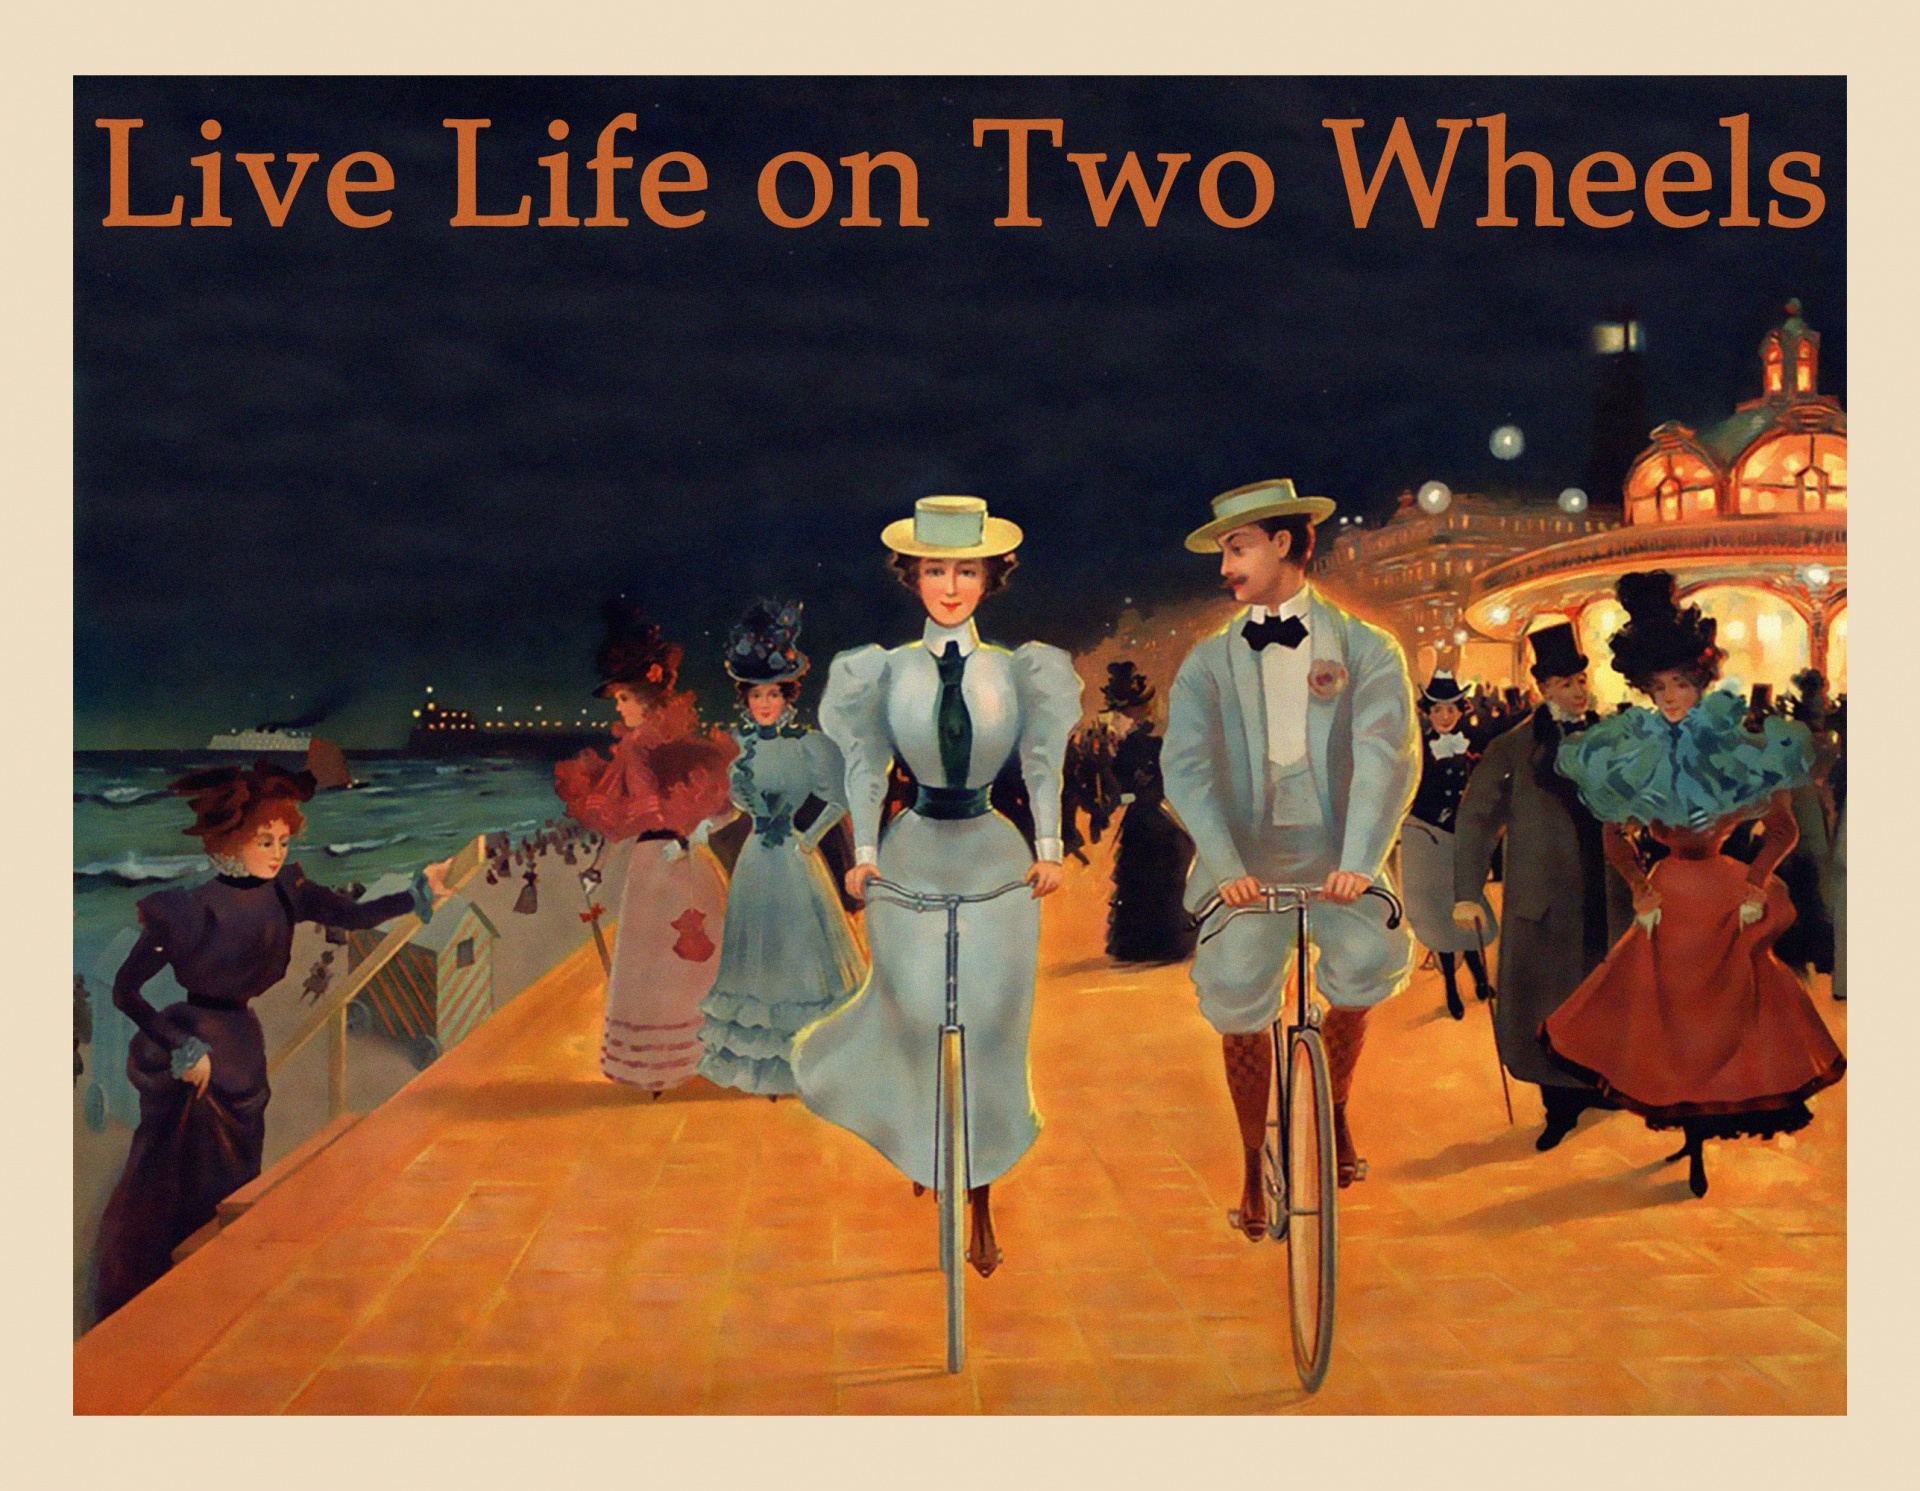 Retro vintage cycling couple with Live Life on Two Wheels text, poster, print